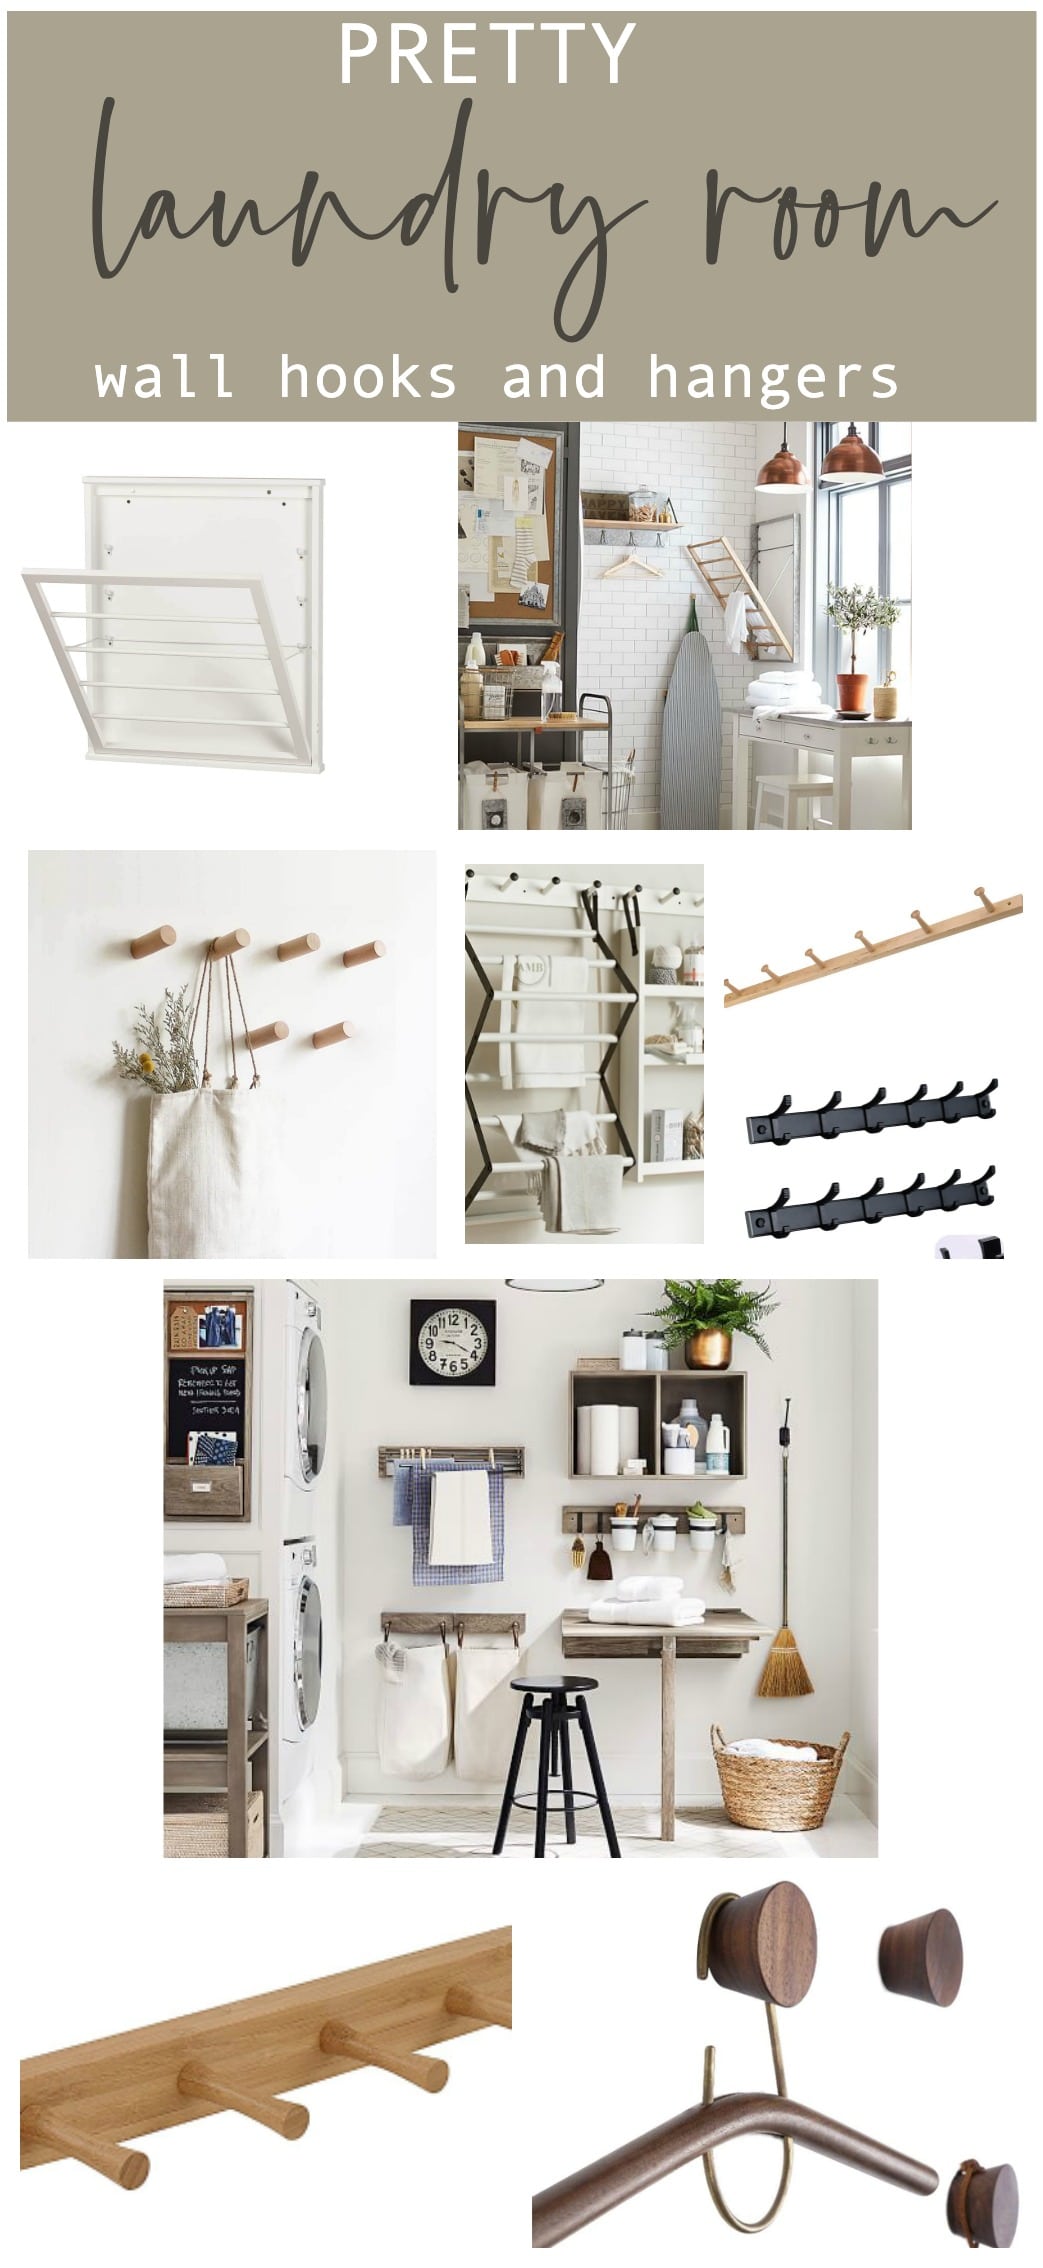 Pretty laundry room wall hooks and hangers for beautiful storage.